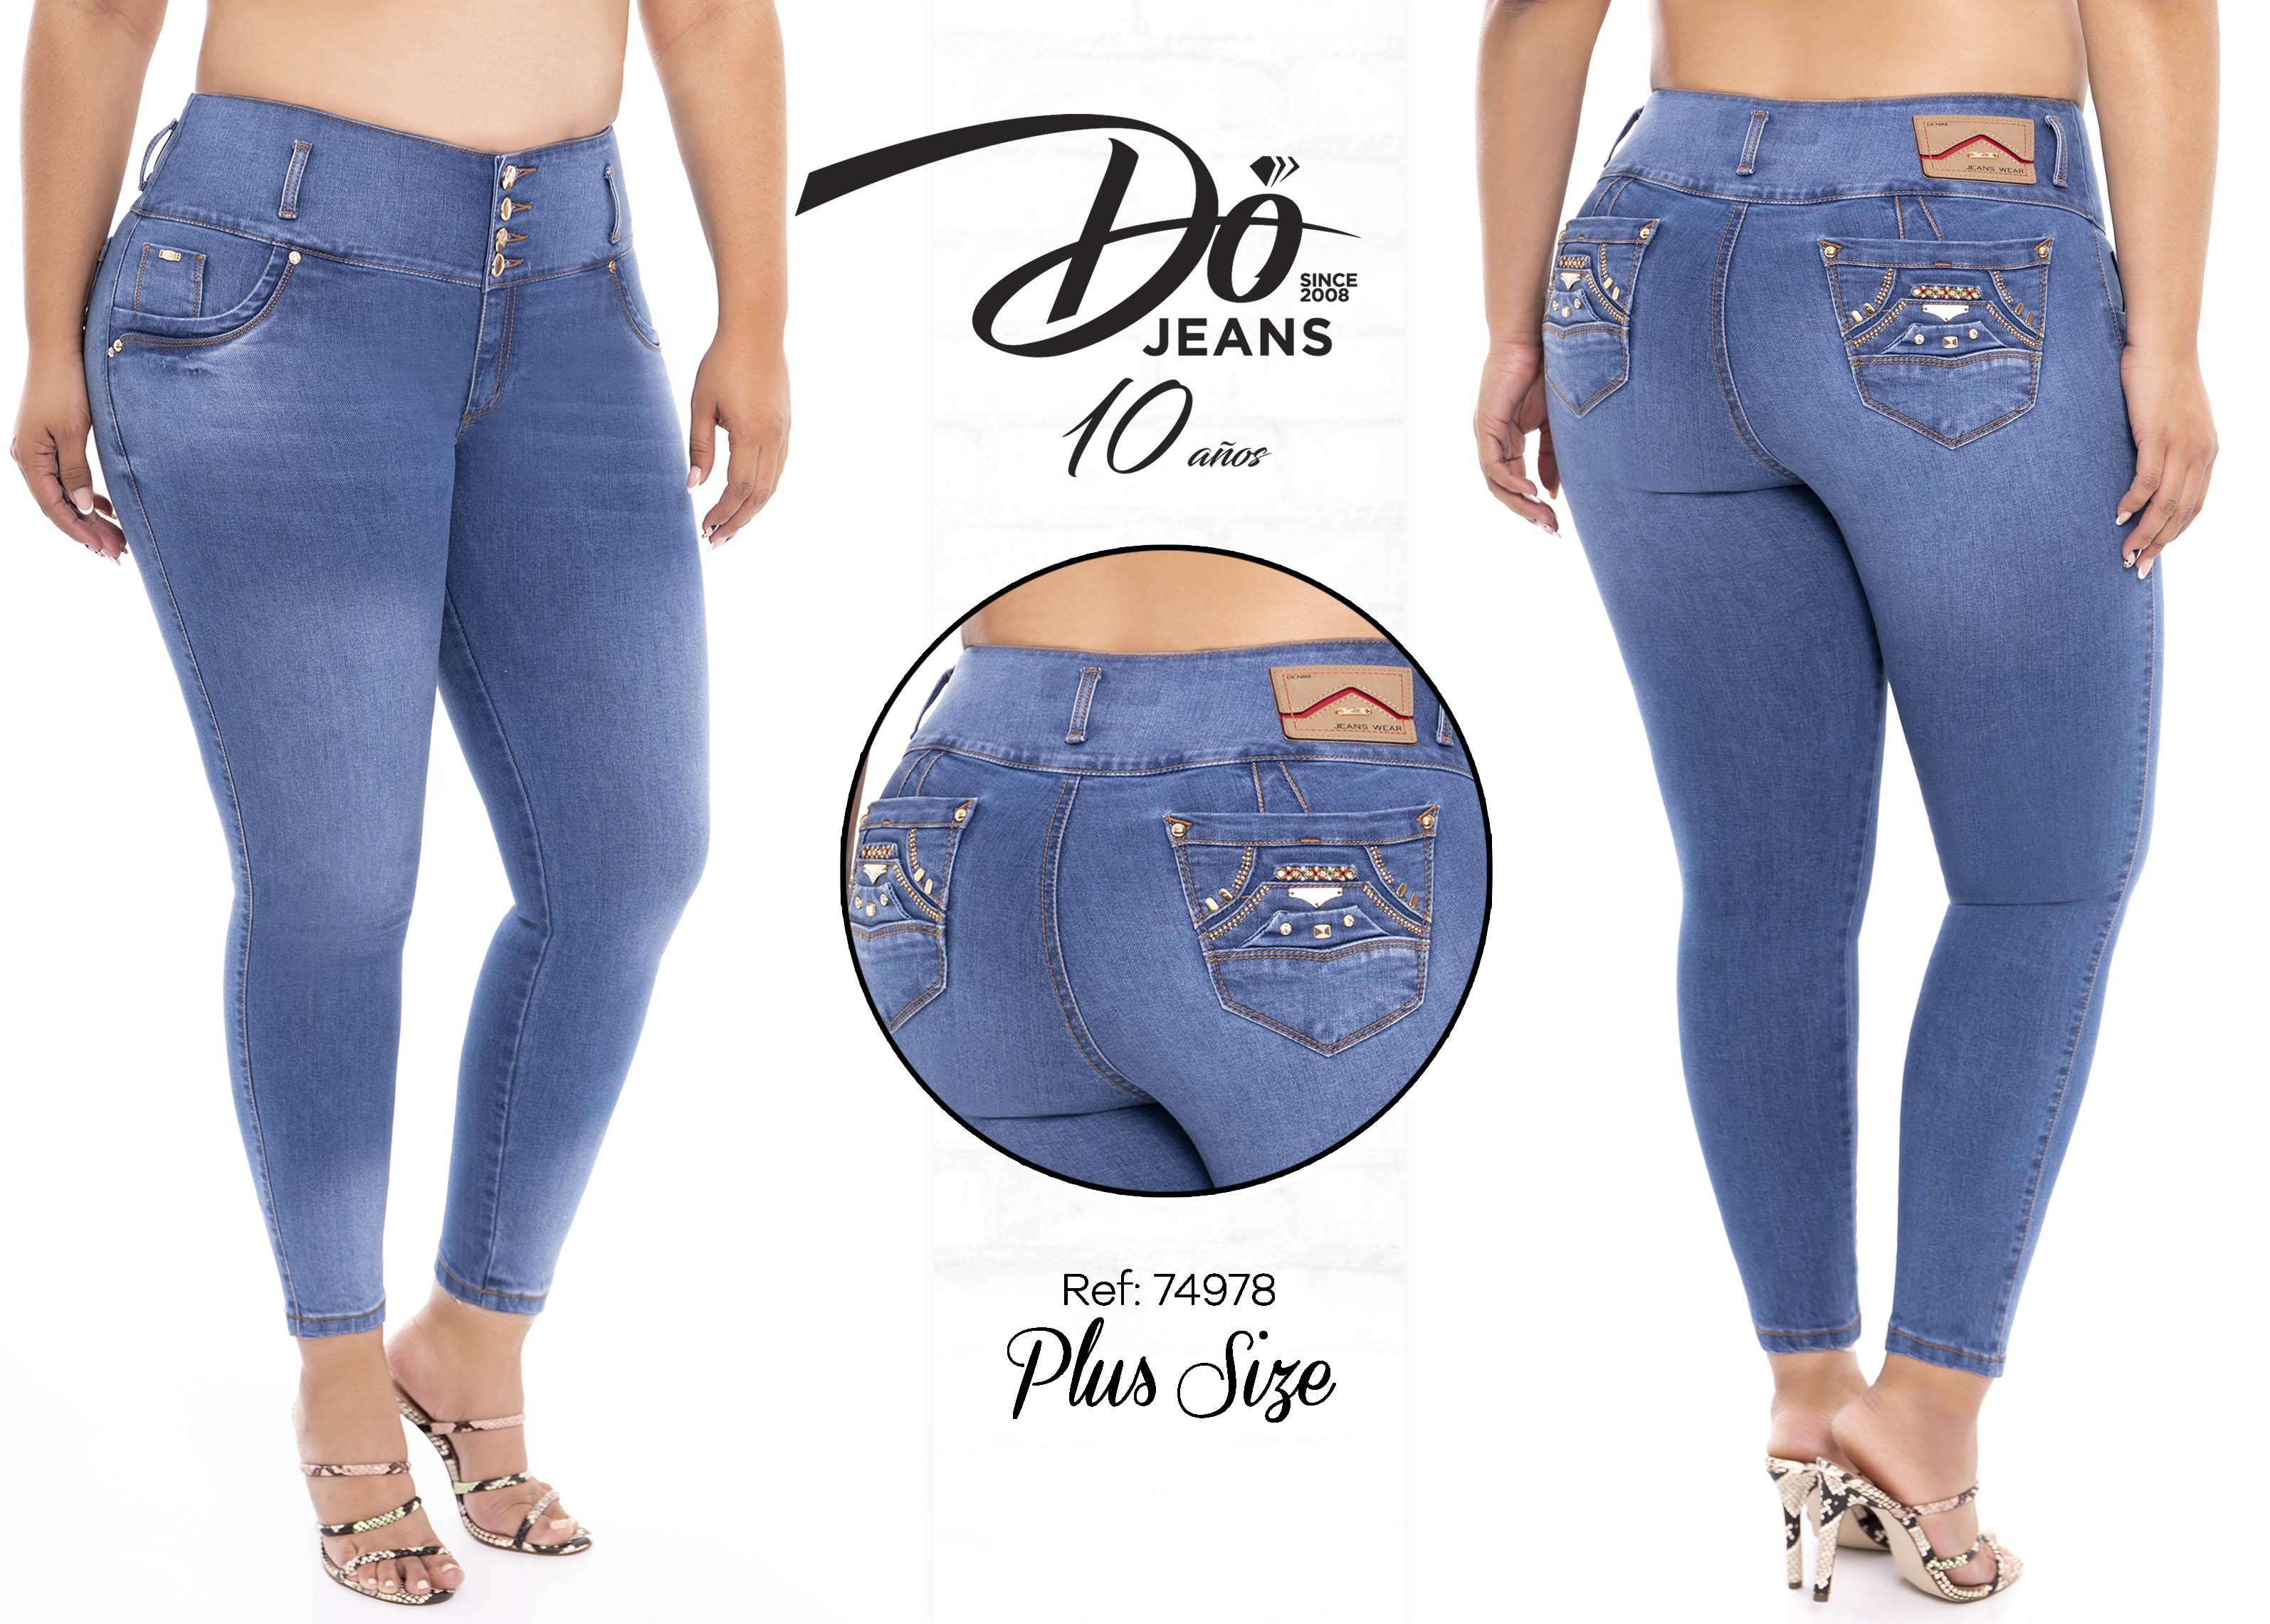 Jeans Levantacola Colombiano - Ref. 248 -74978 D